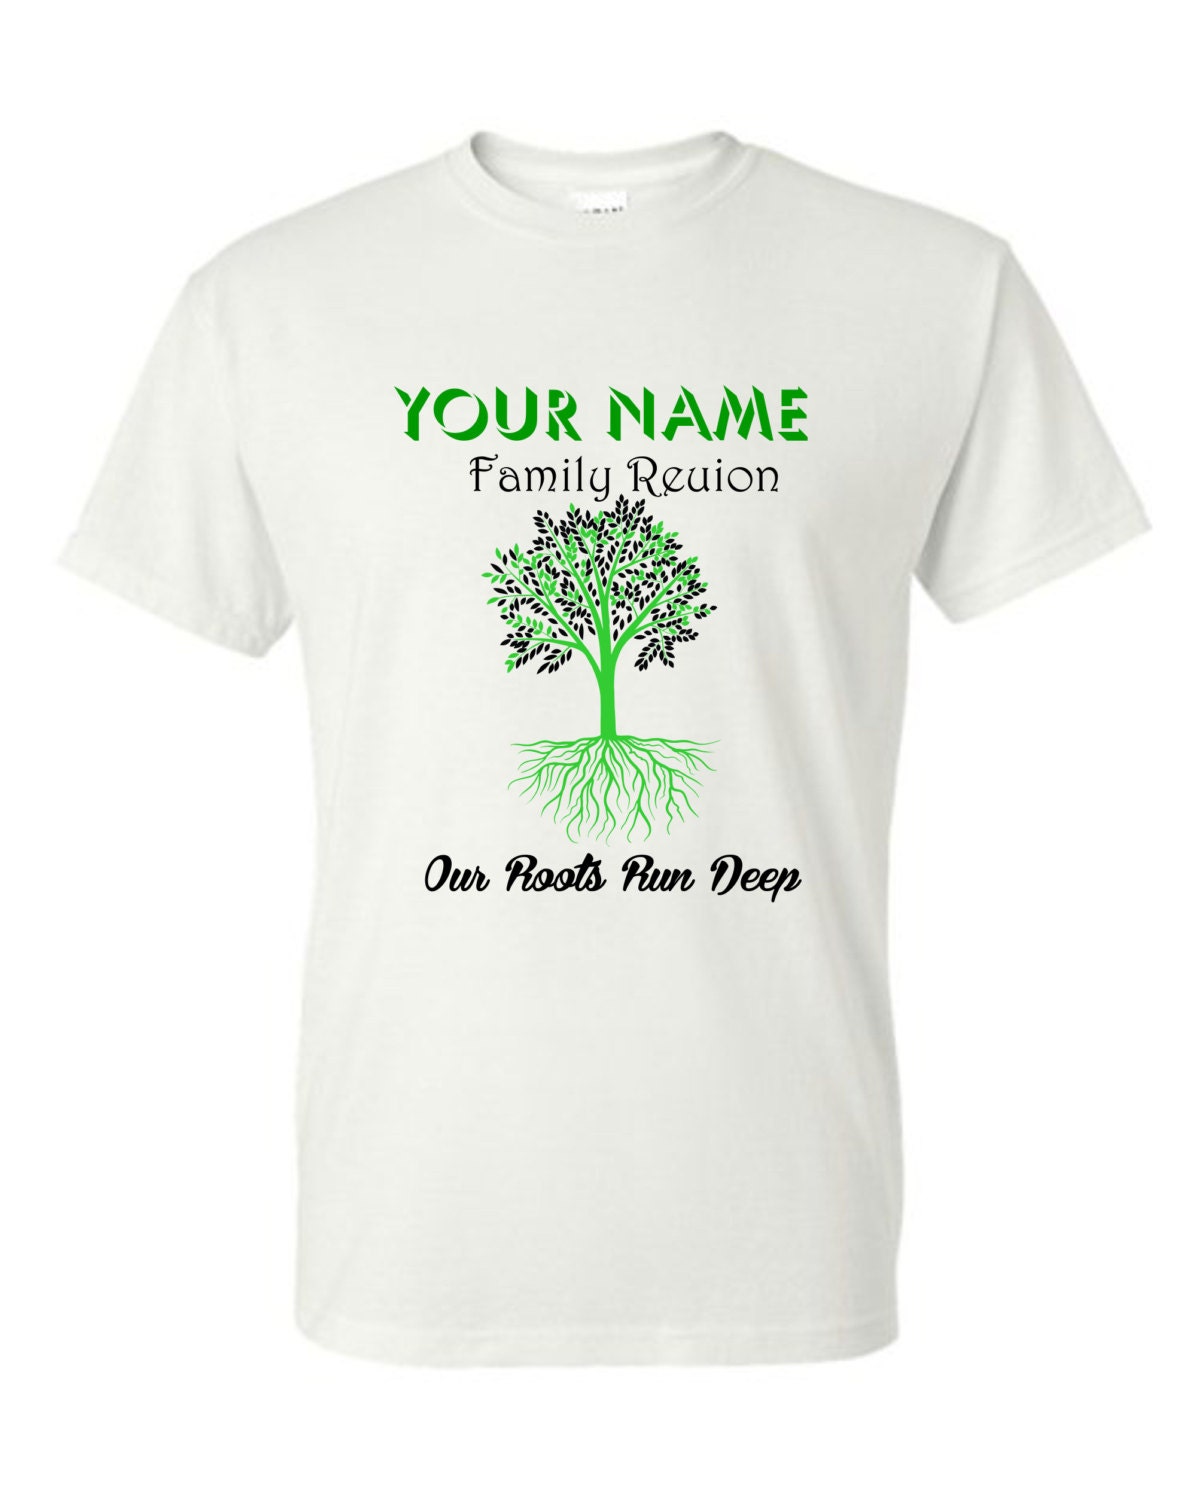 Our Roots Run Deep Family Reunion T-shirts 12 or more count